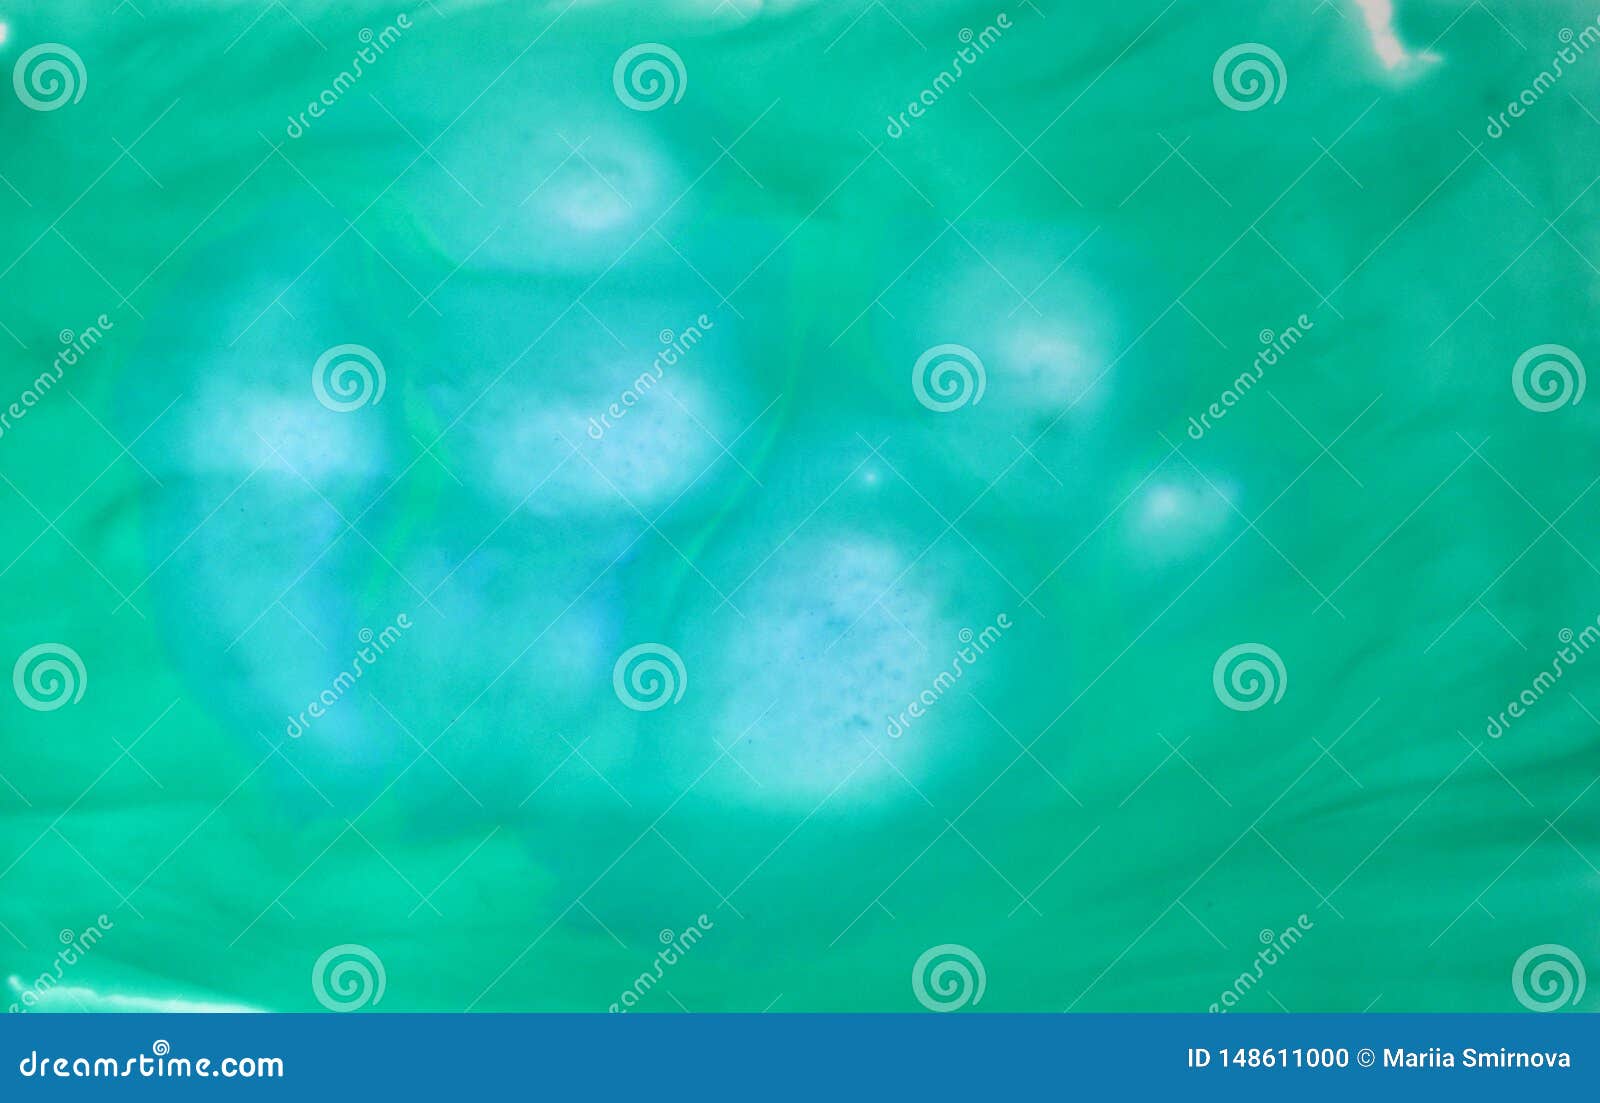 Abstract Green Watercolor Background Stock Photo - Image of poster ...